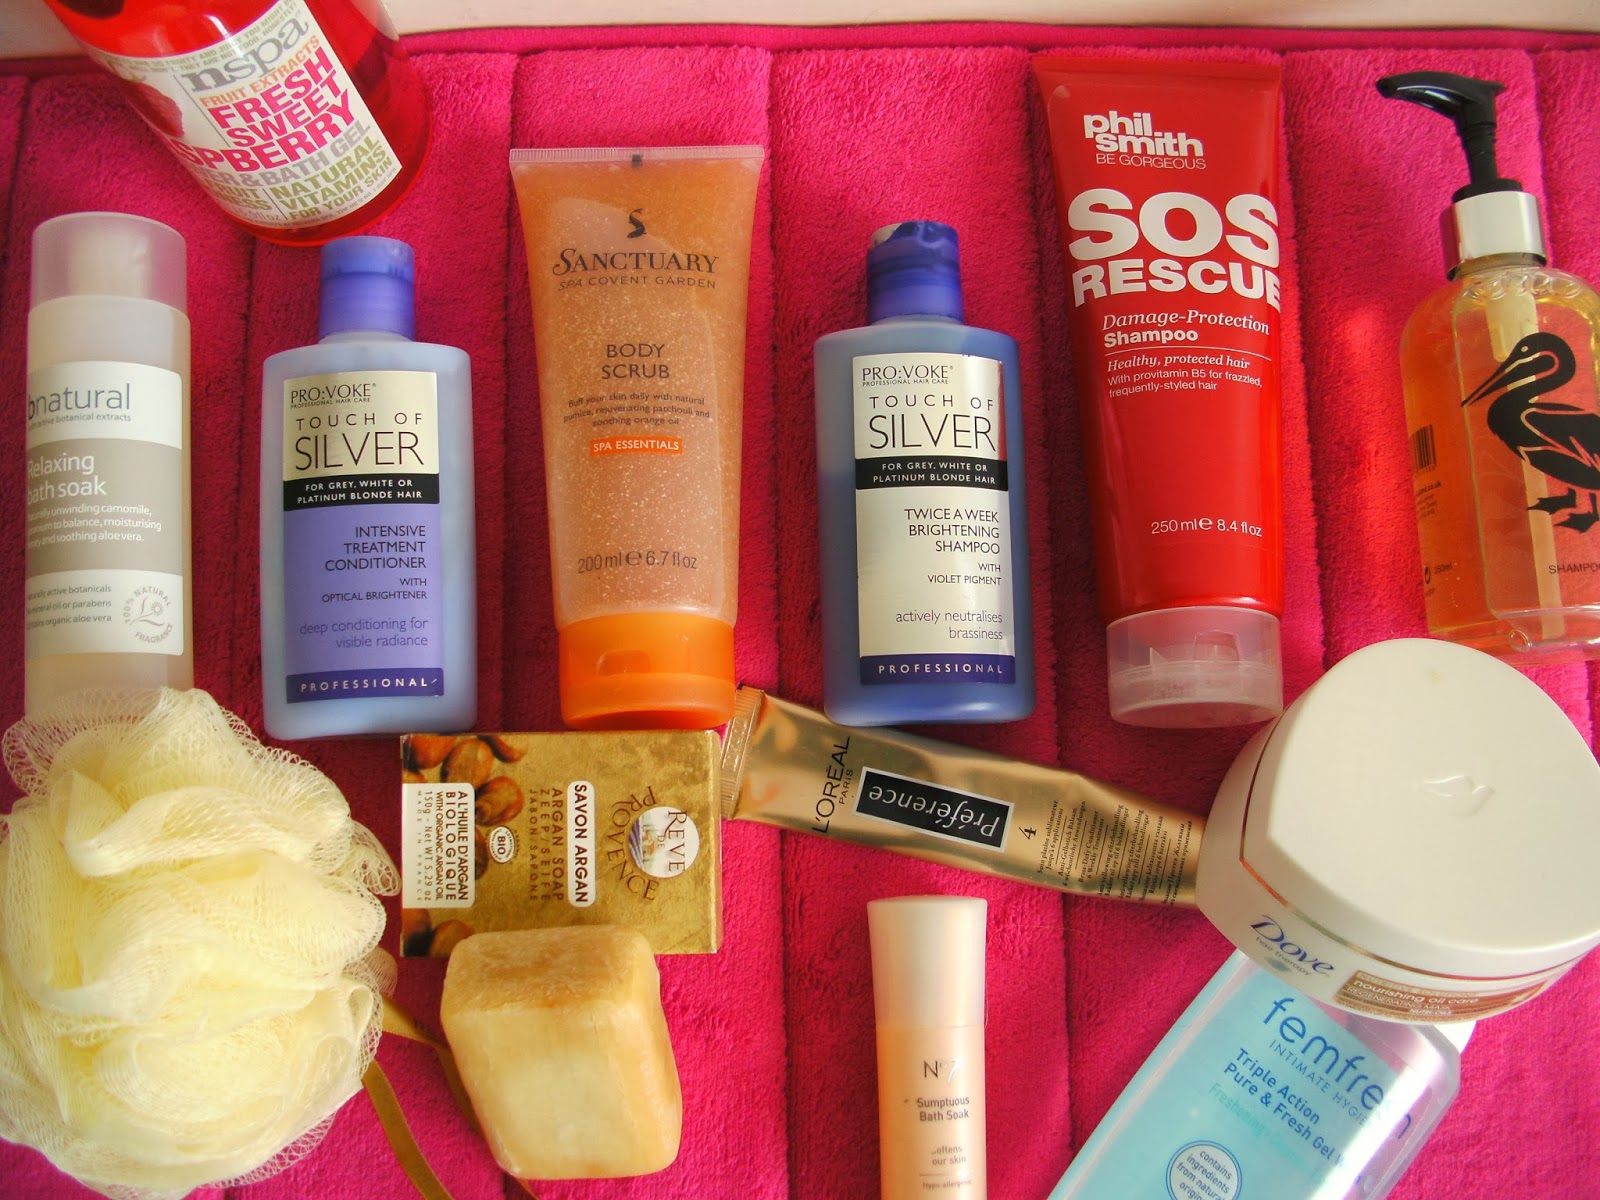 What's in my Shower - Hair, Shower & Bath Products. nspa, Sanctuary Spa, PROVOKE Touch of Silver, Phil Smith, Duck Island, L'Oreal, Dove Hair Mask, No7 Bath Soak, Argan Soap, bnatural, Shower Puff, Femfresh